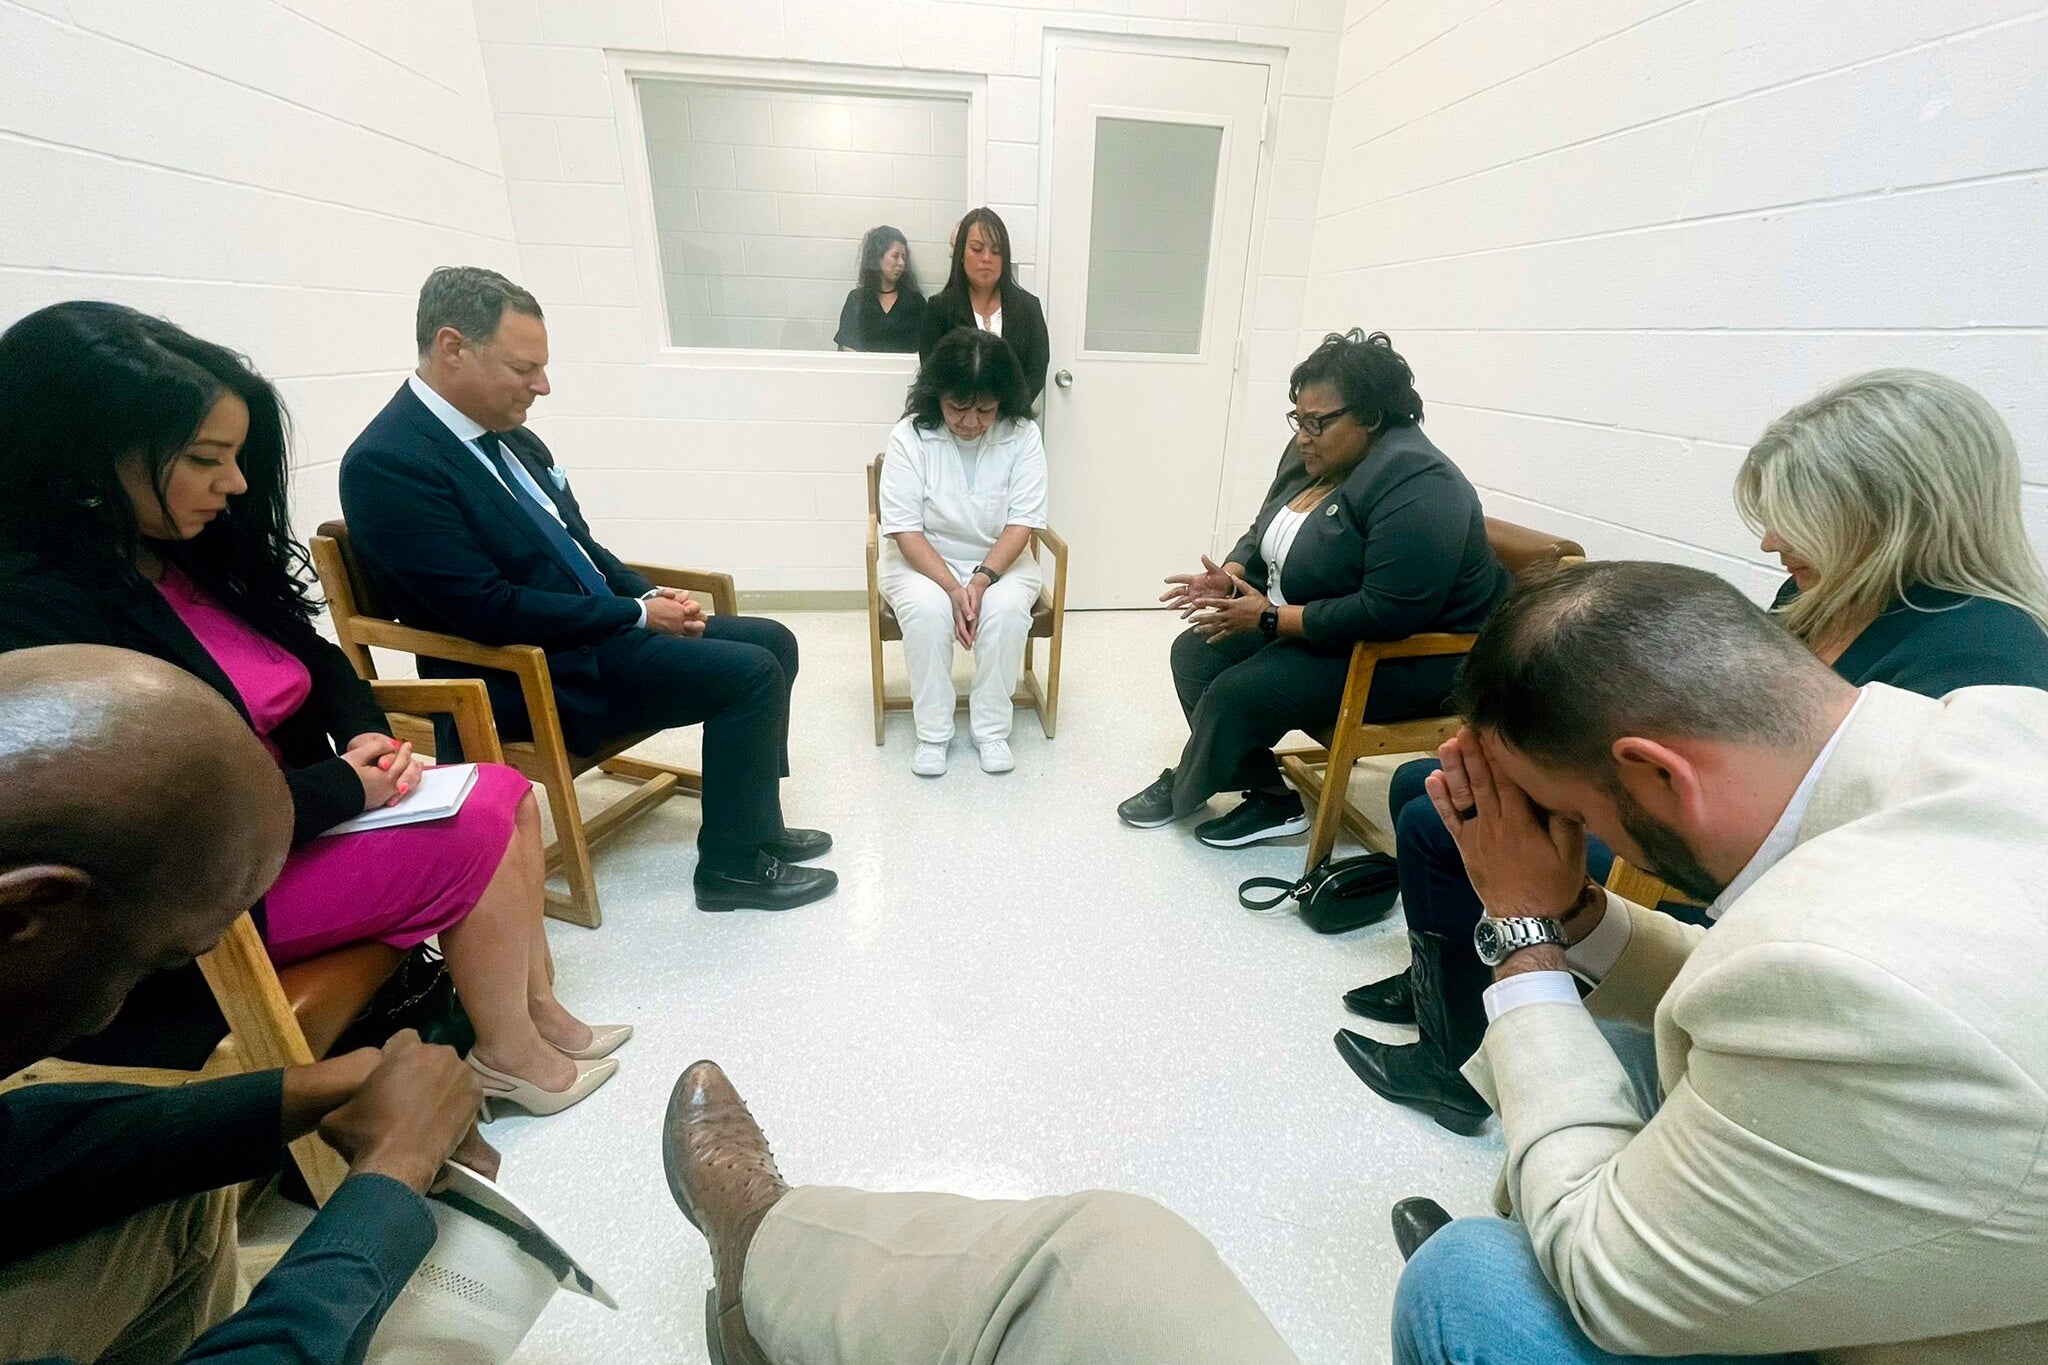 Texas death row inmate Melissa Lucio, dressed in white, leads a group of seven Texas lawmakers in prayer in a room at the Mountain View Unit in Gatesville, Texas